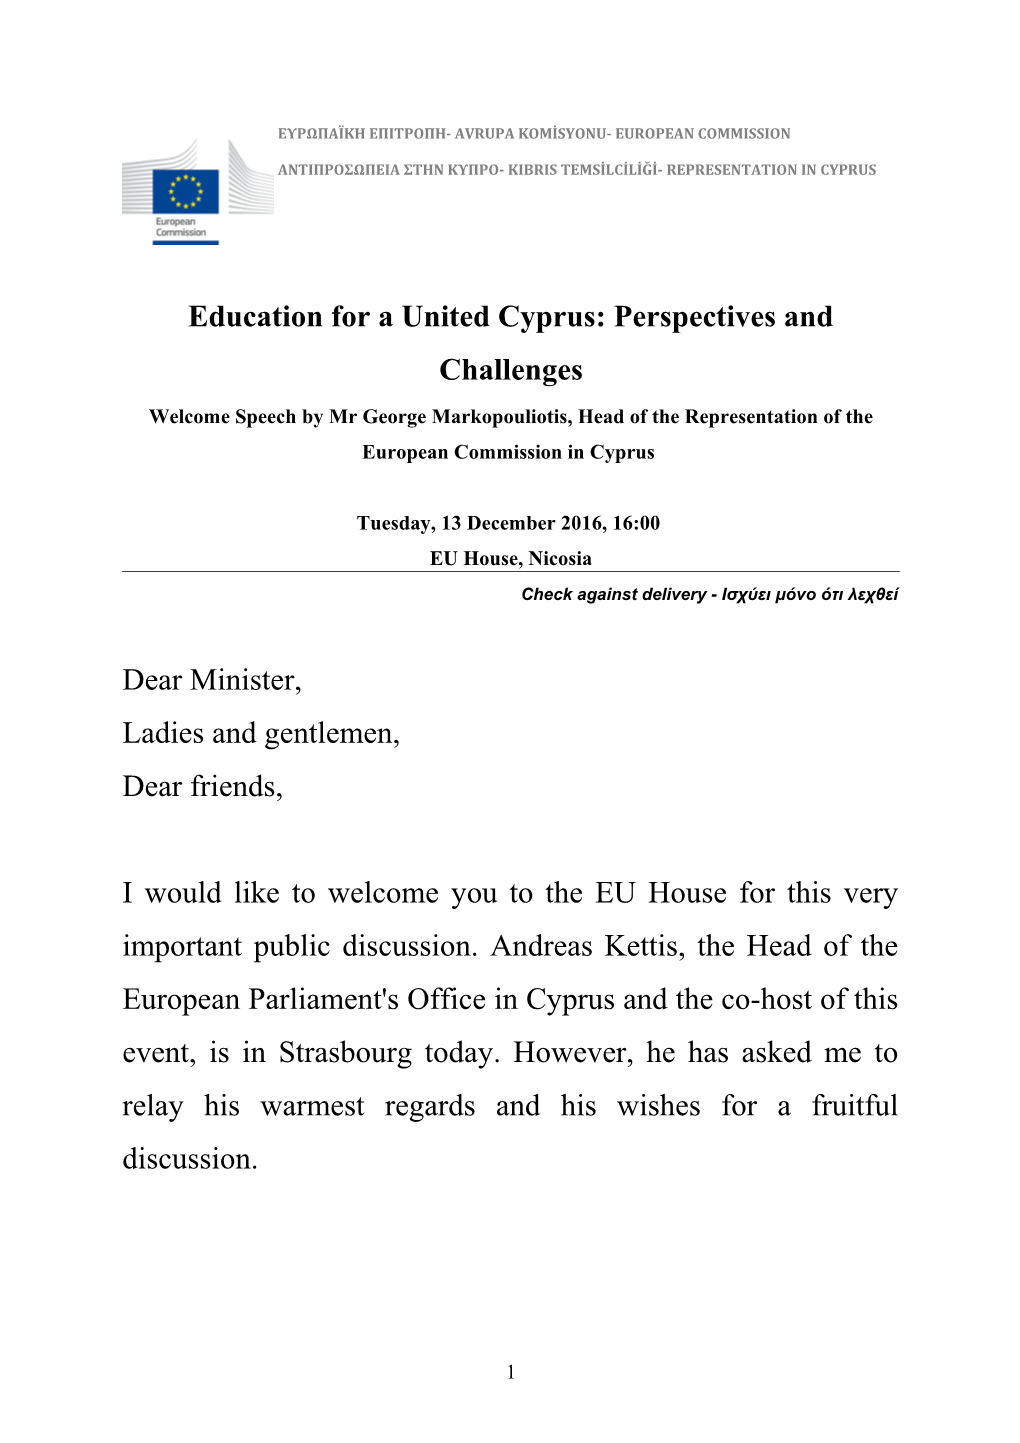 Education for a United Cyprus: Perspectives and Challenges